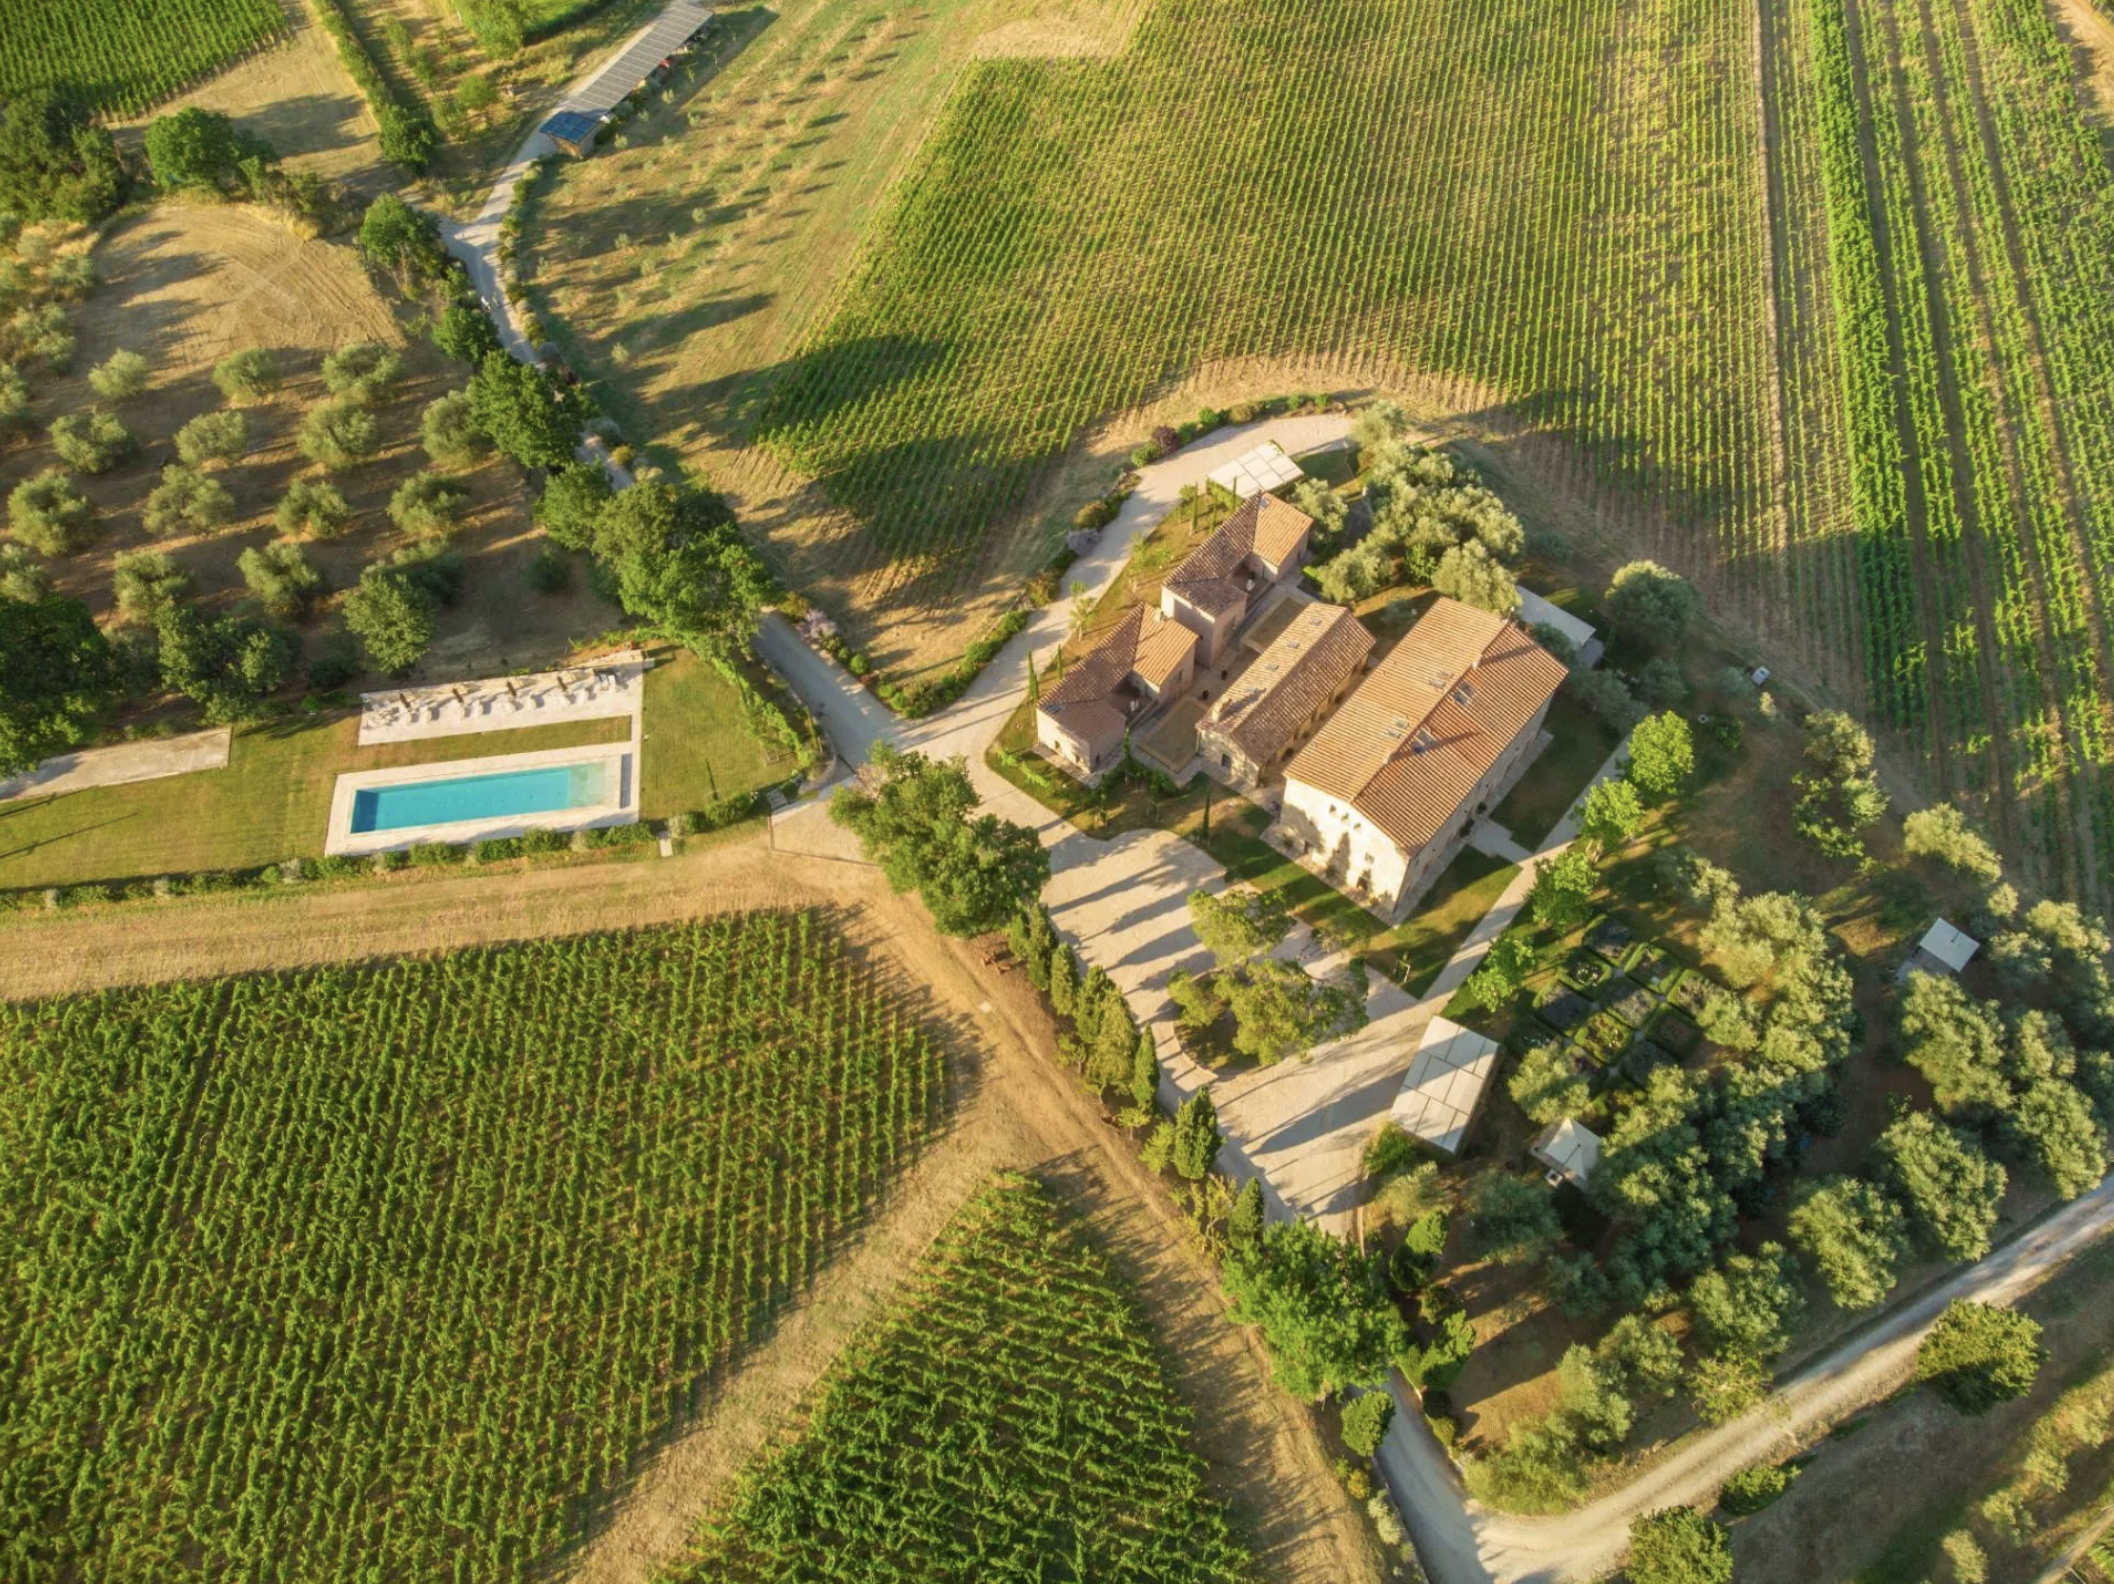 Francis York Villa Travertino: Luxury Villa and Wine Estate in the Heart of Tuscany 4.png